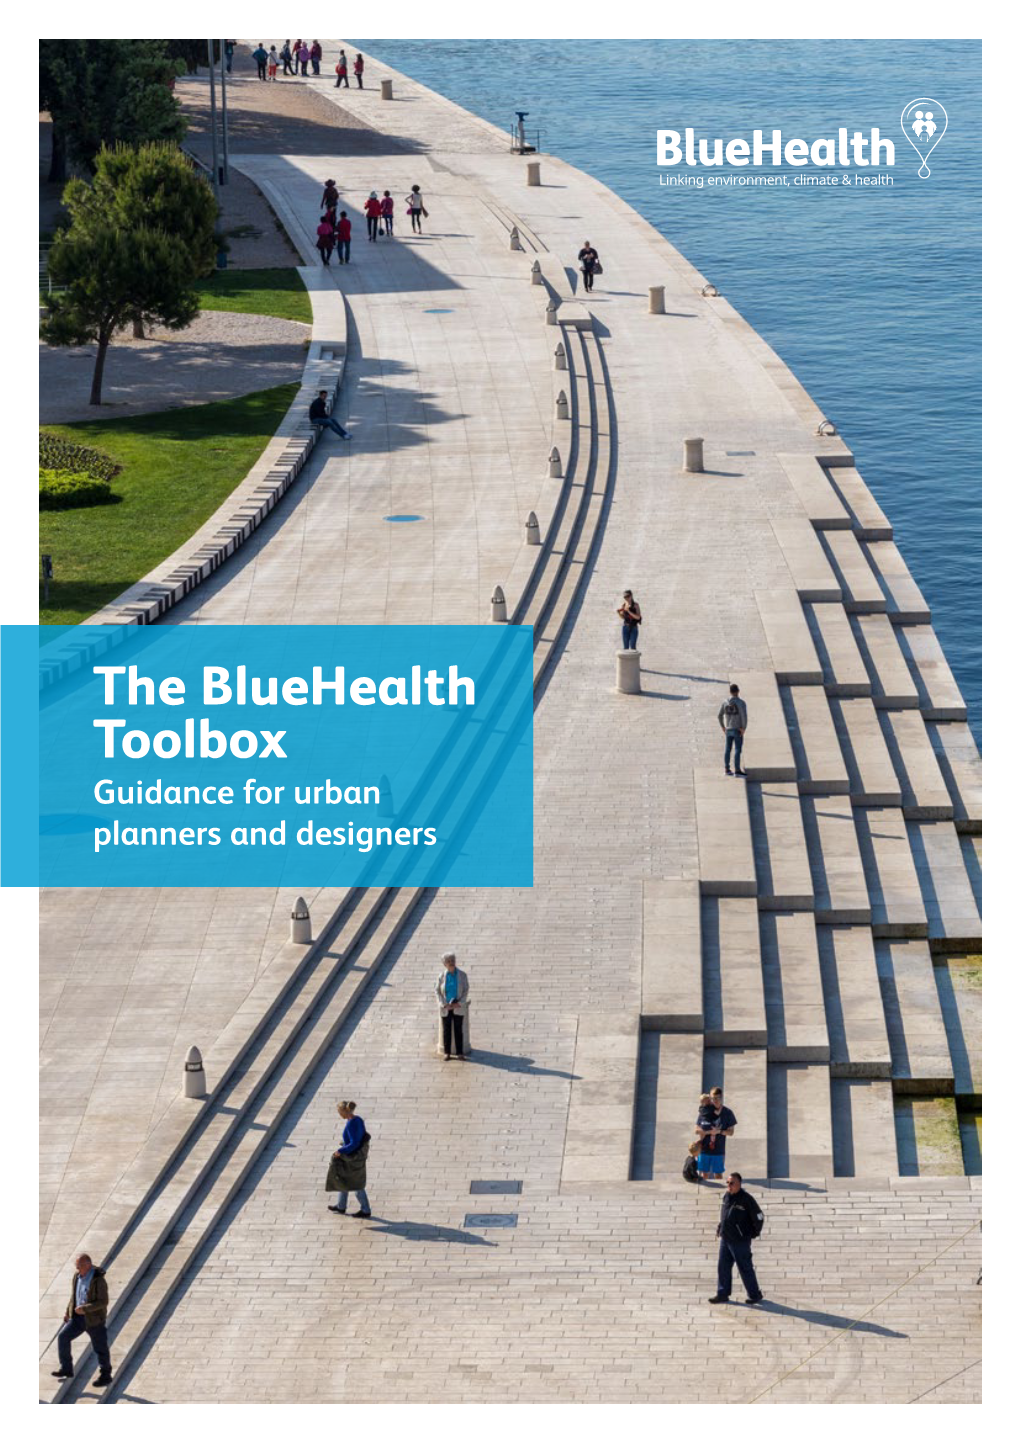 The Bluehealth Toolbox Guidance for Urban Planners and Designers Contents